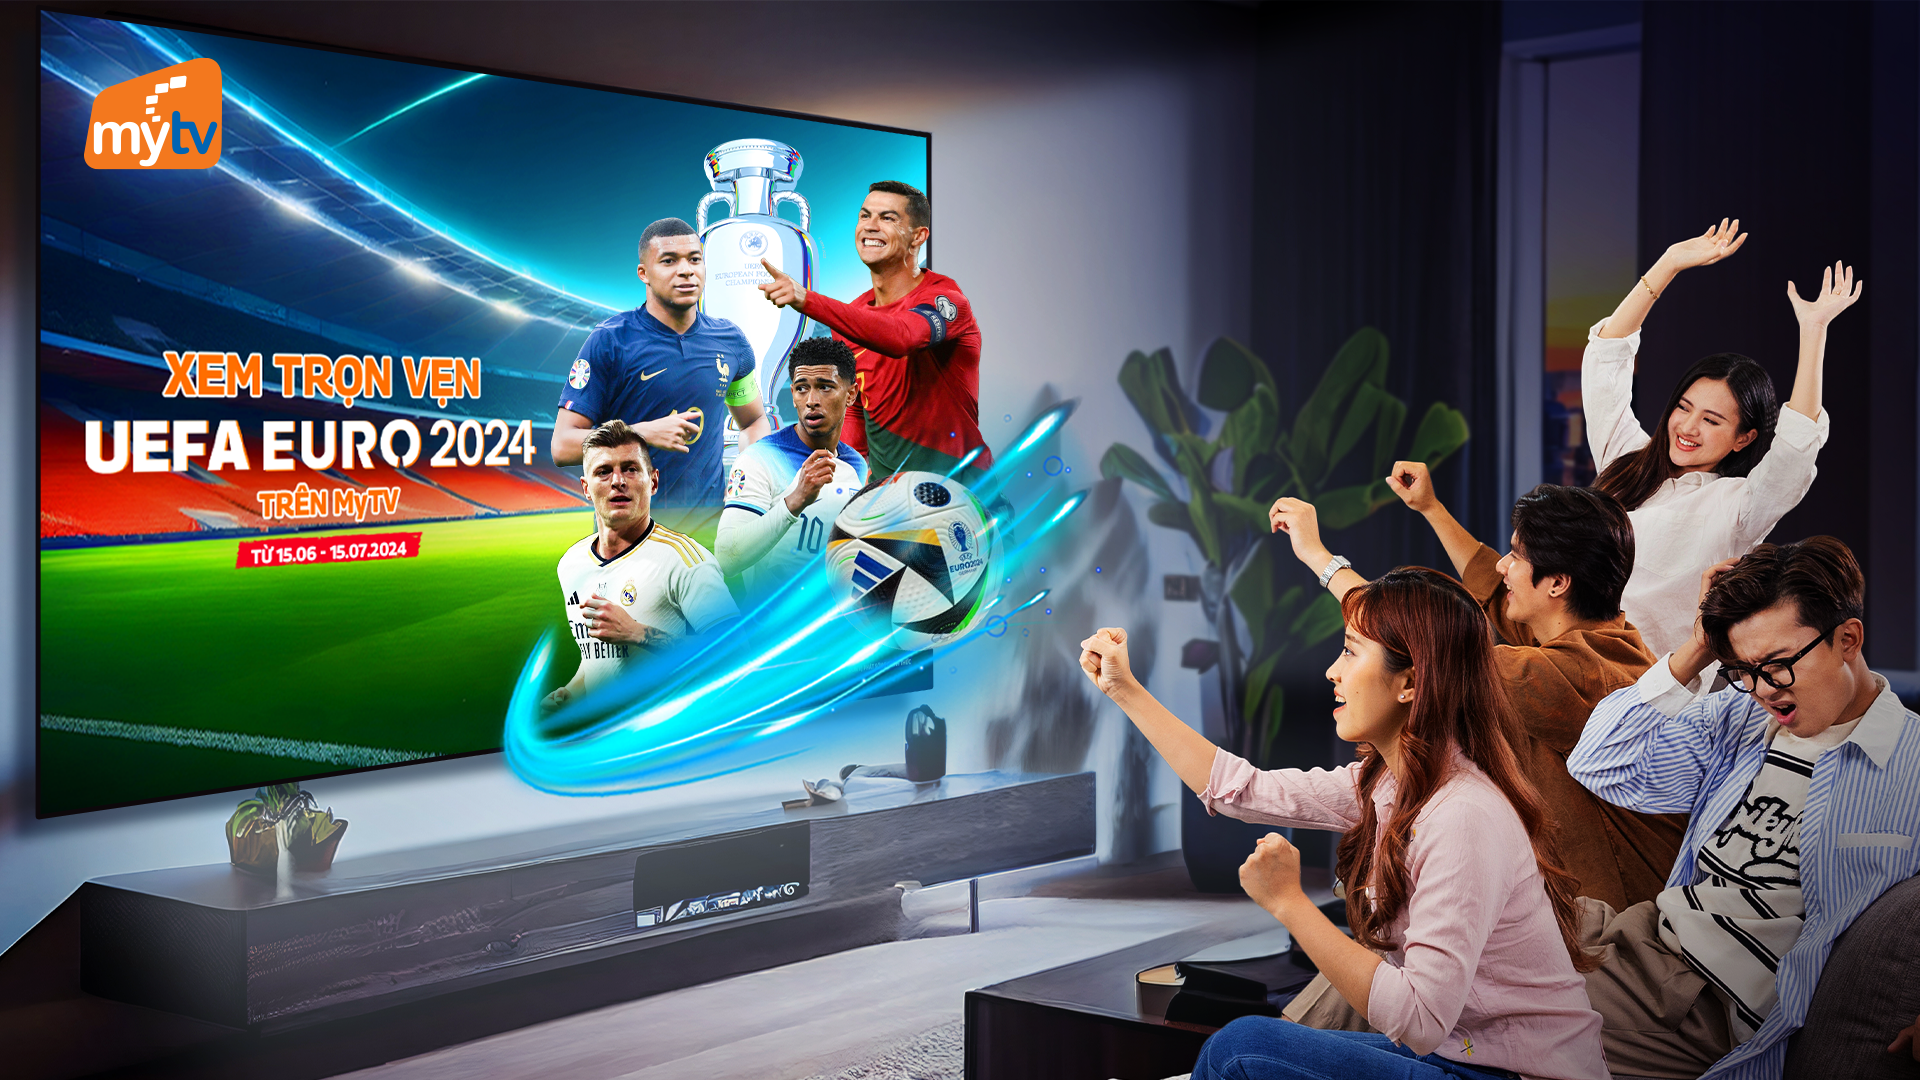 Watch UEFA Euro 2024 in full with amenities on MyTV.